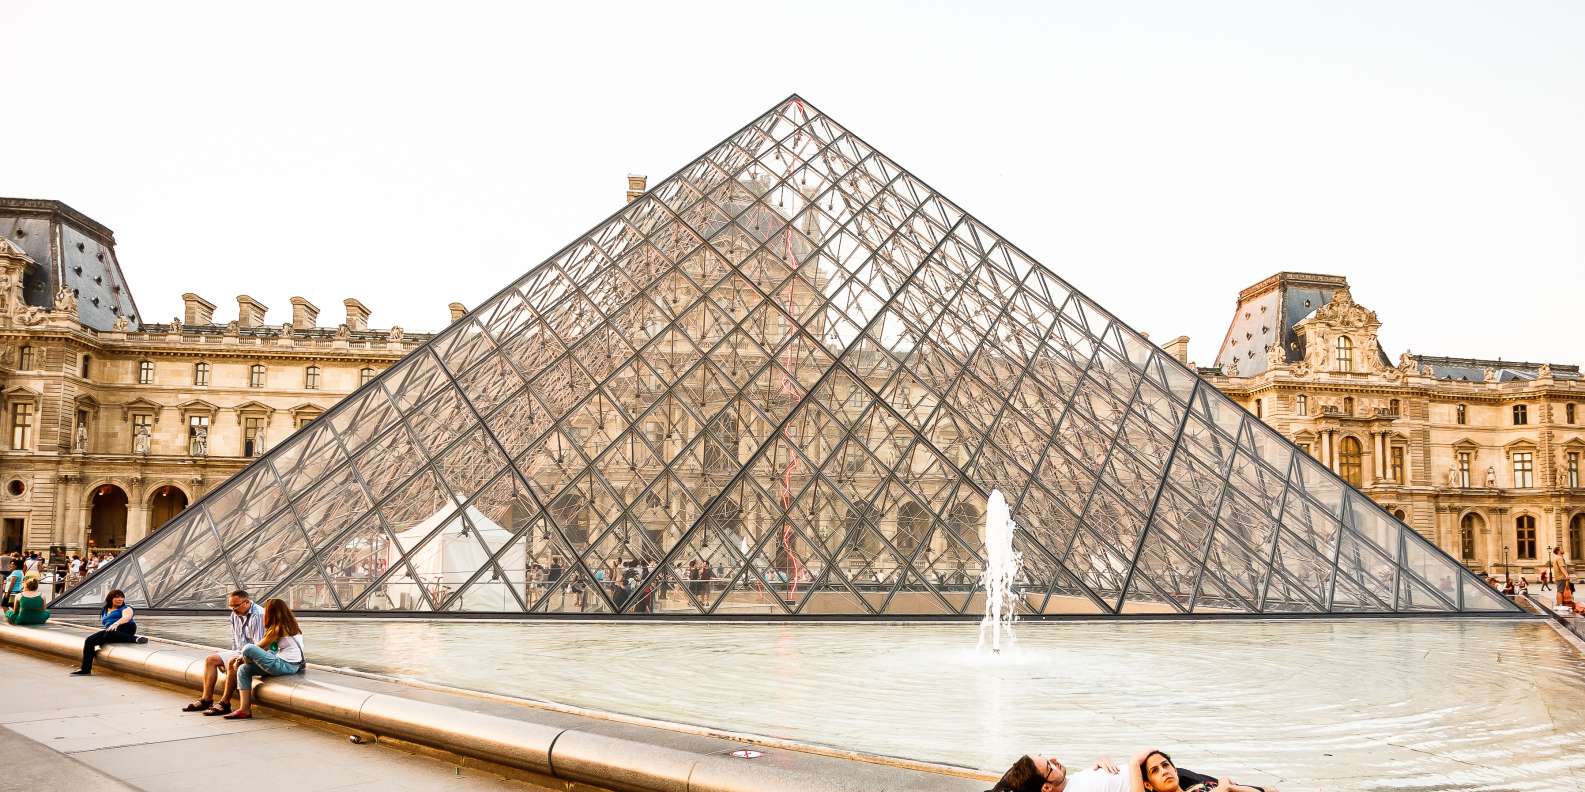 3-story tall Louis Vuitton pyramid new for Something in the Water 2023